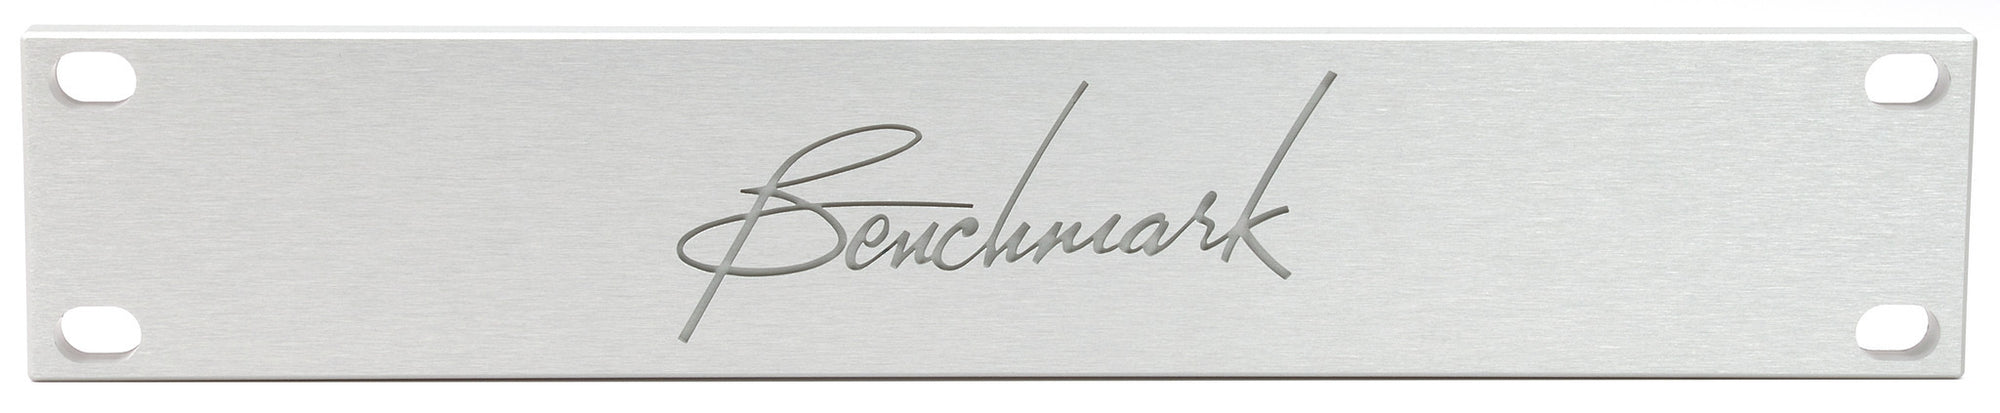 Premium Silver Blank Plate with Engraved Benchmark Logo